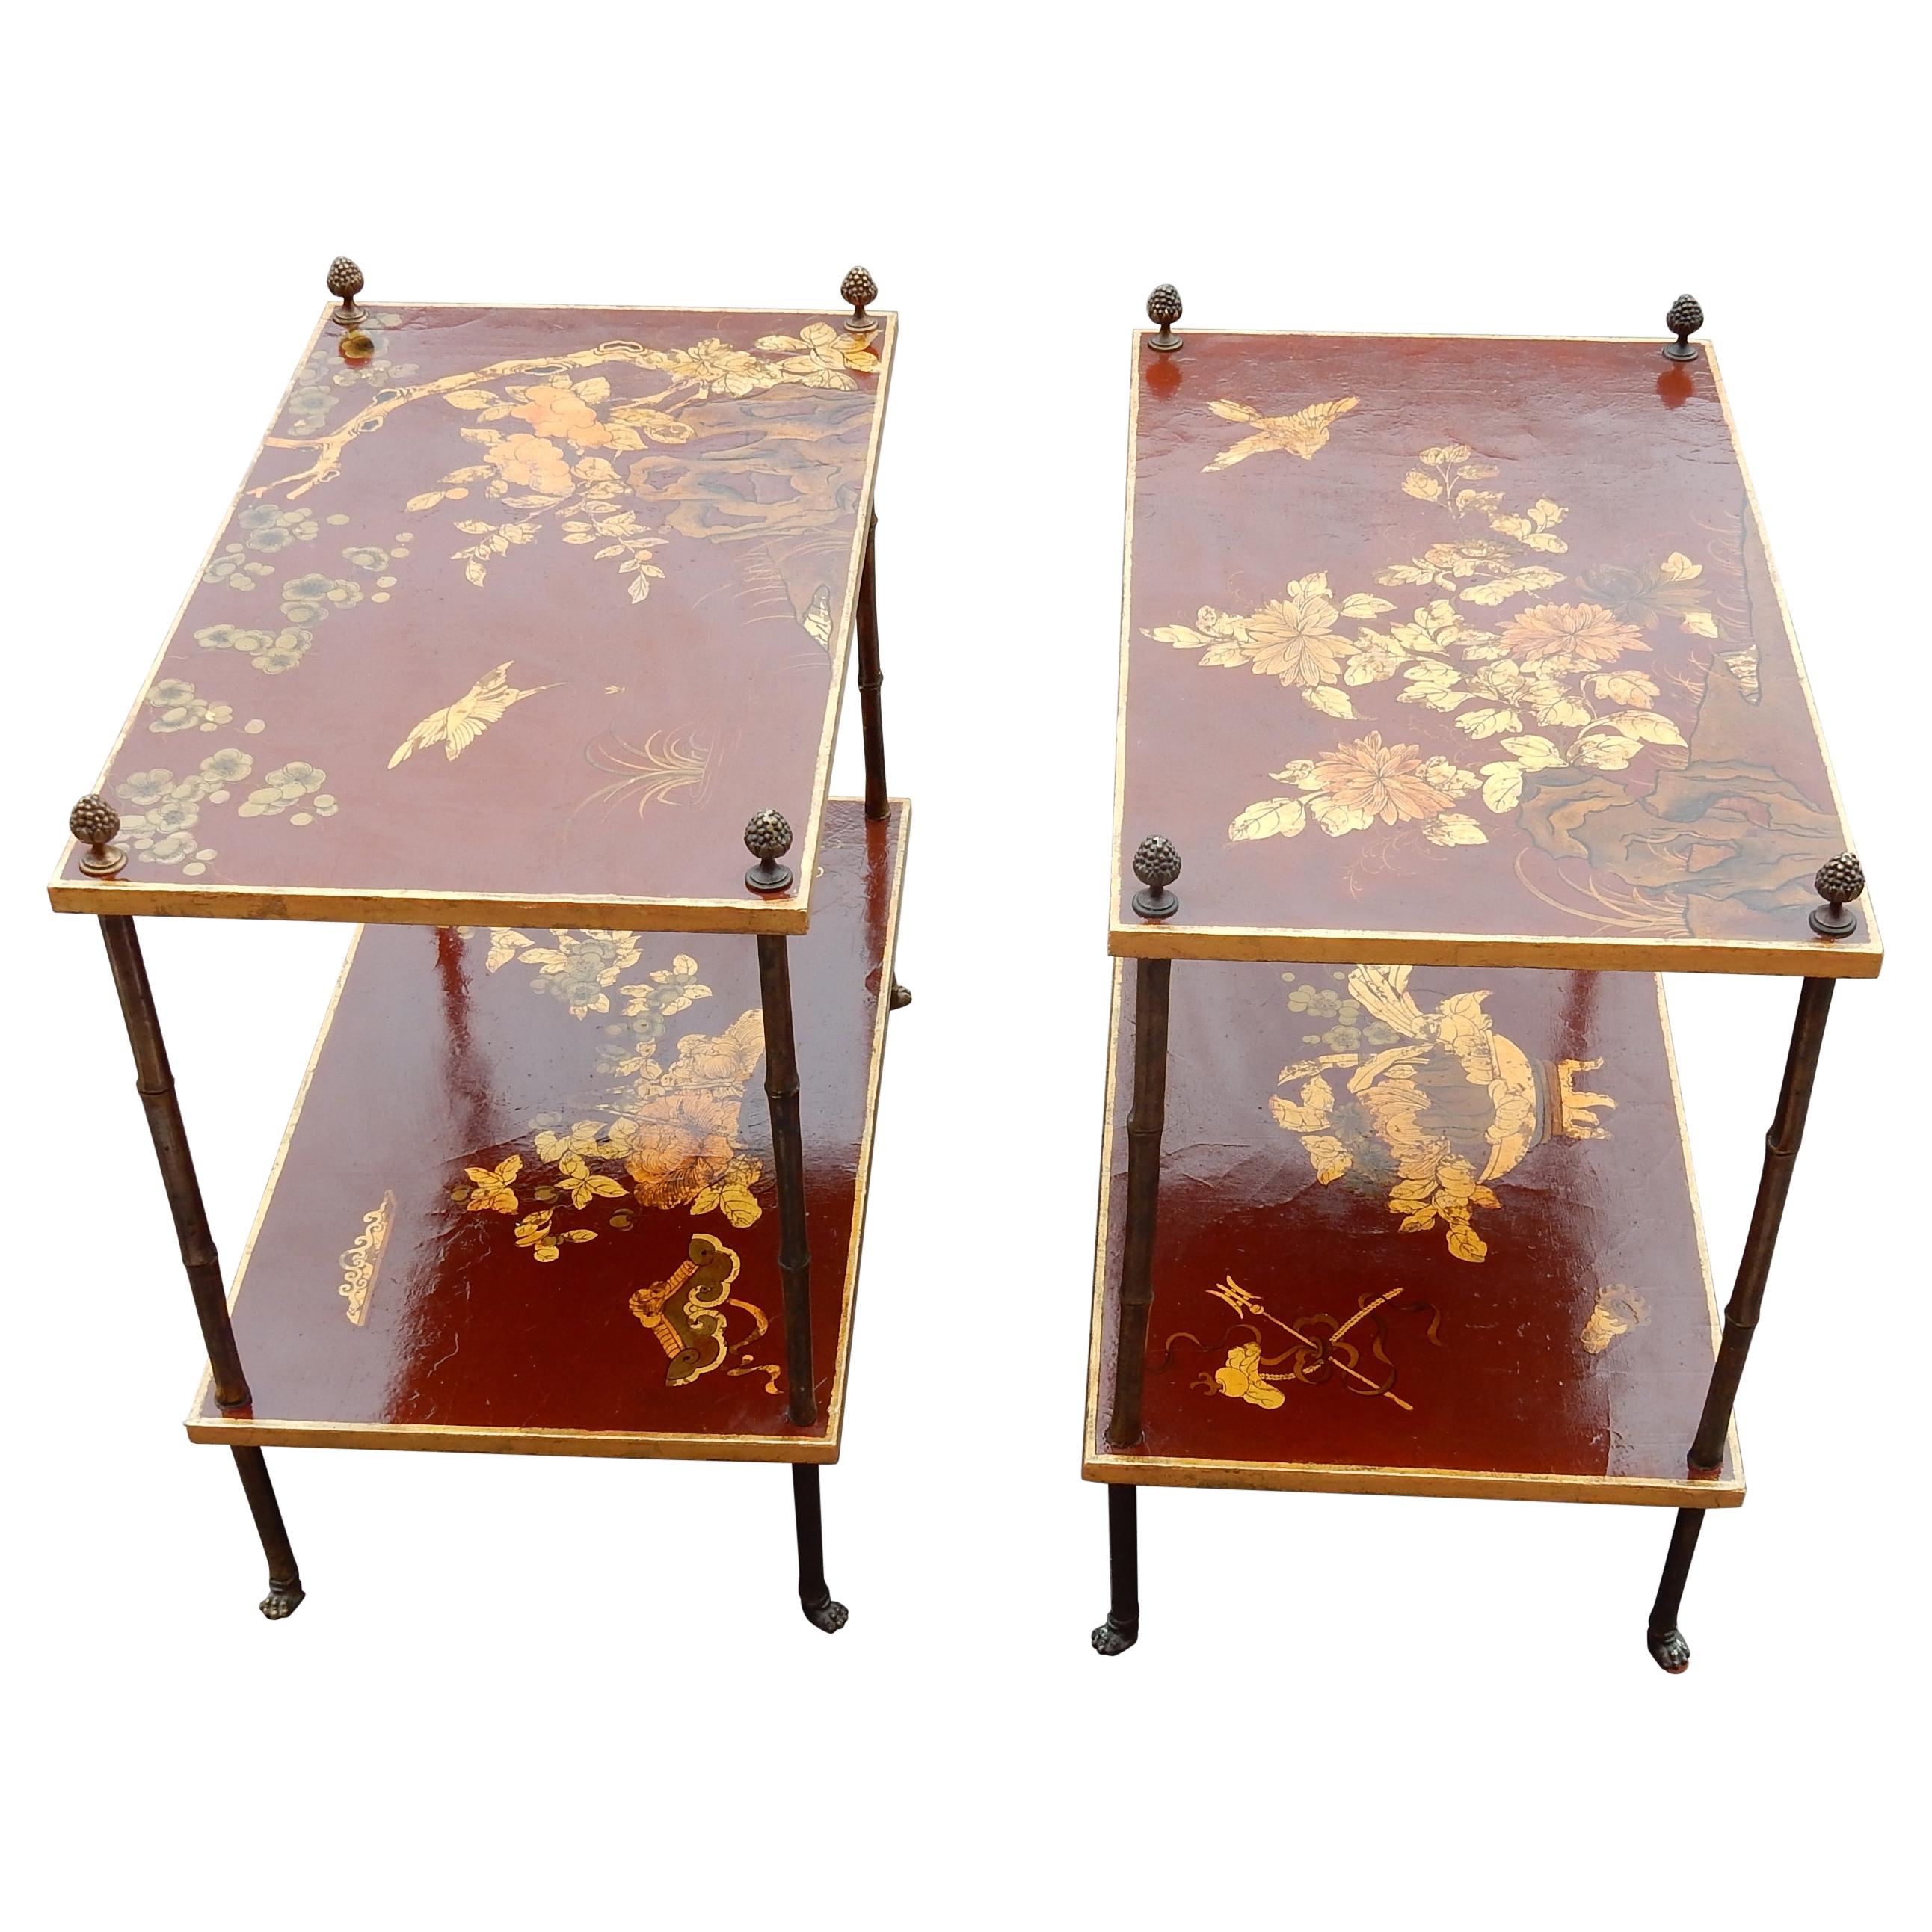 1950 Pair of Tables Bamboo Decor in Gilt Bronze and Chinese lacquer